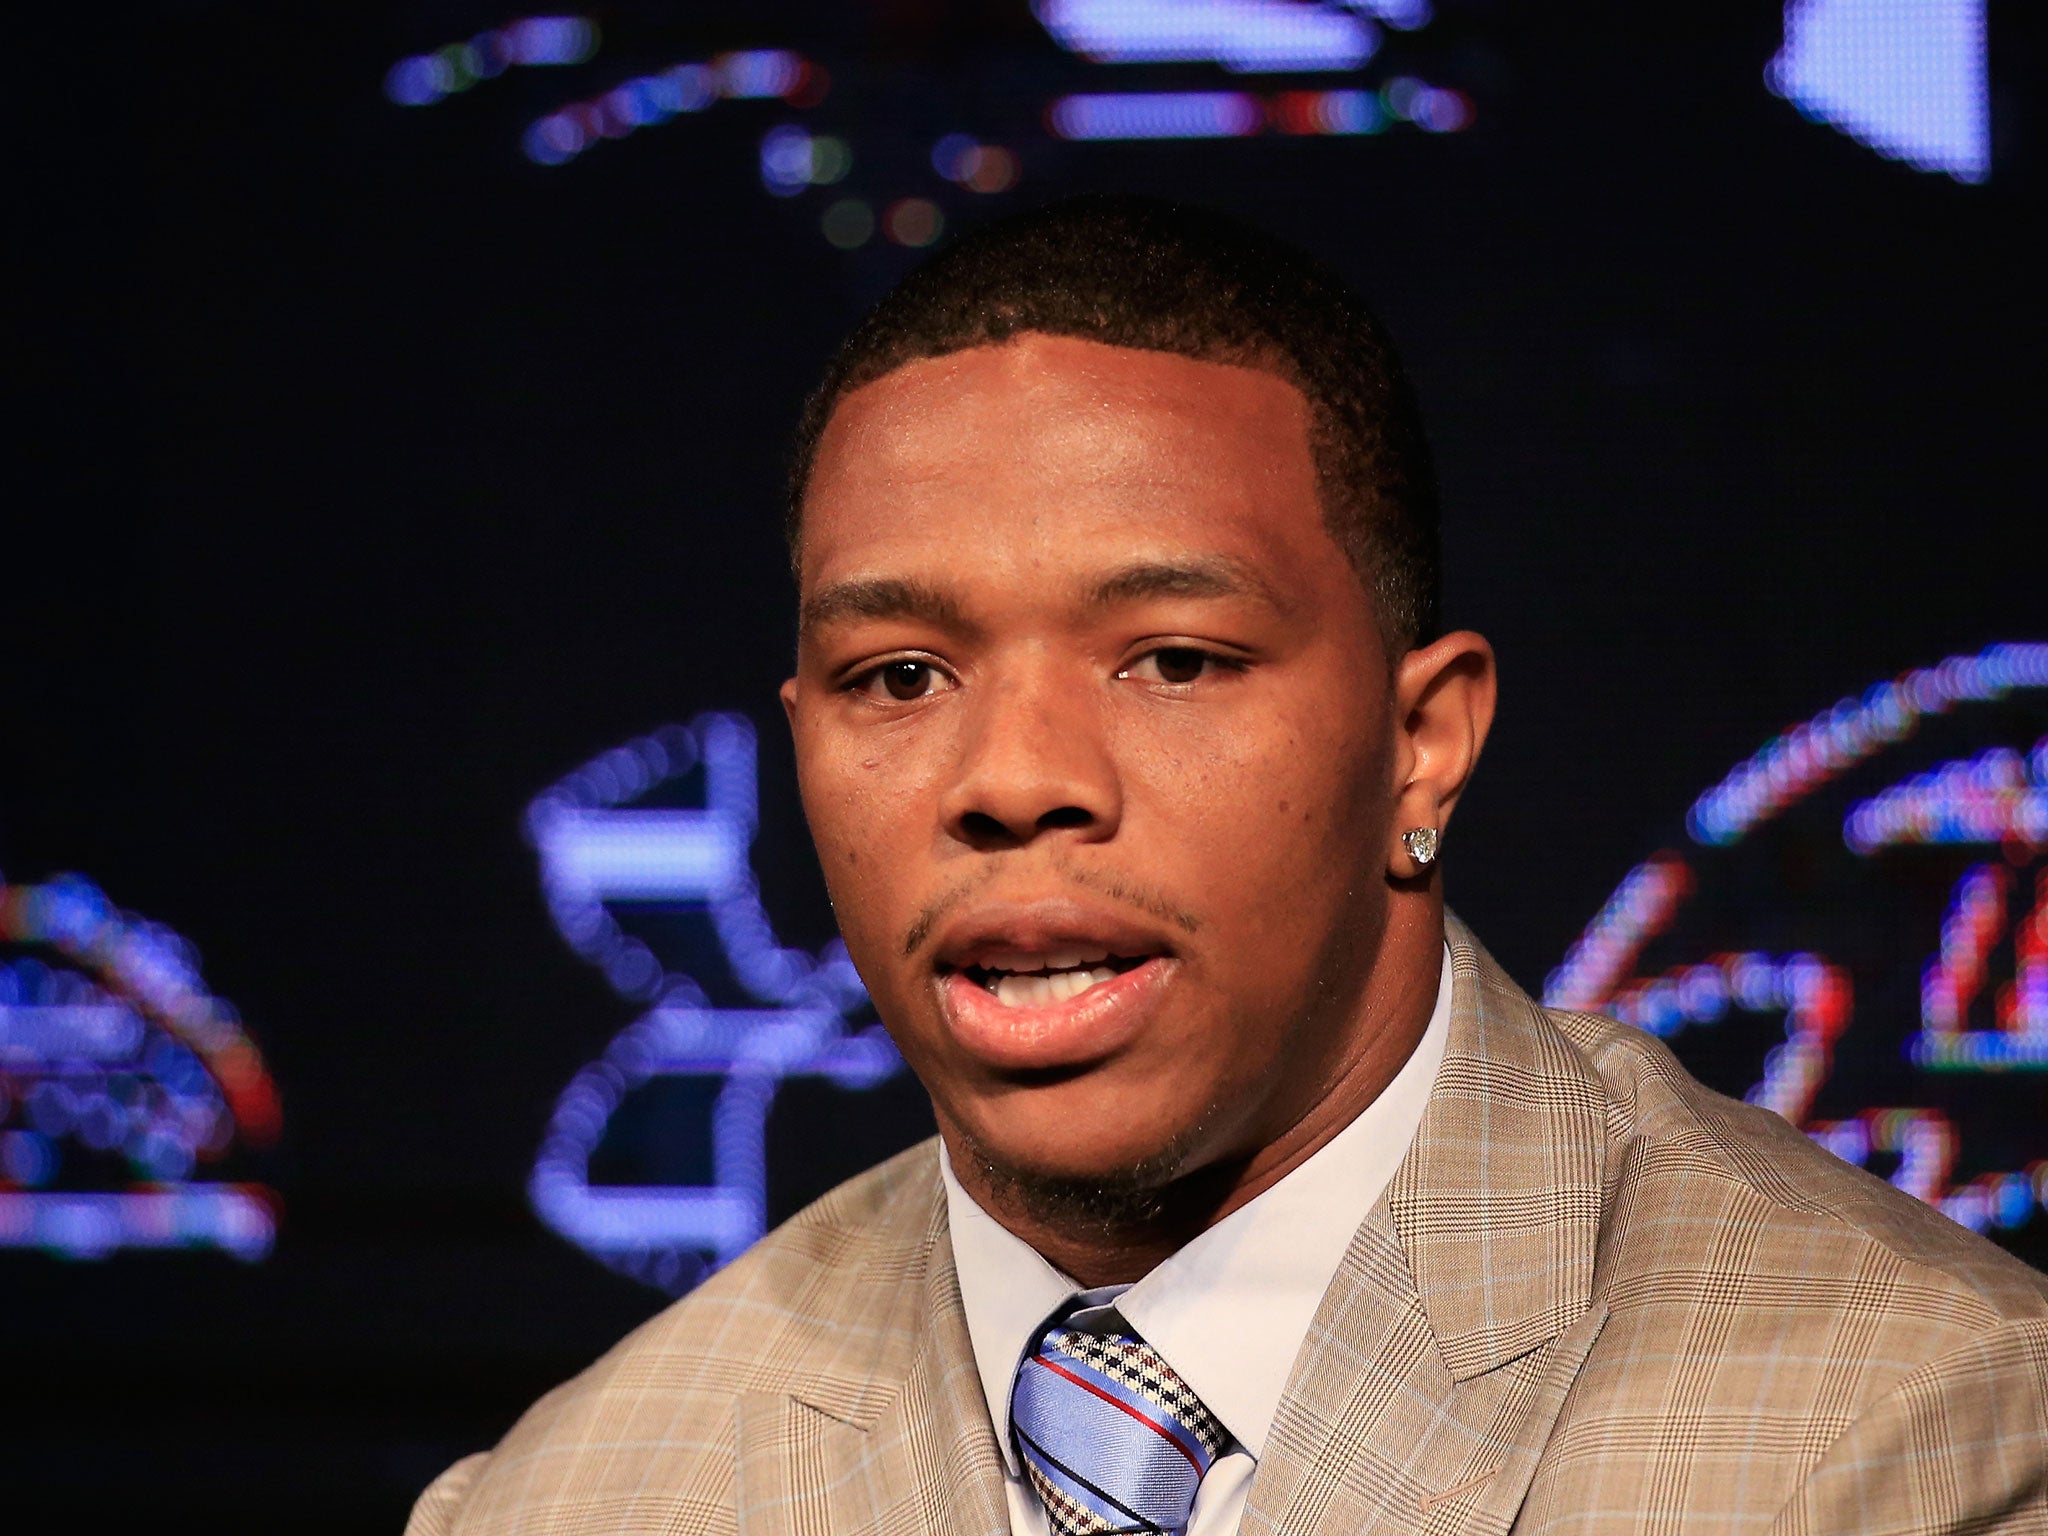 Ray Rice had the aggravated assault charge dropped after he attended an educational program